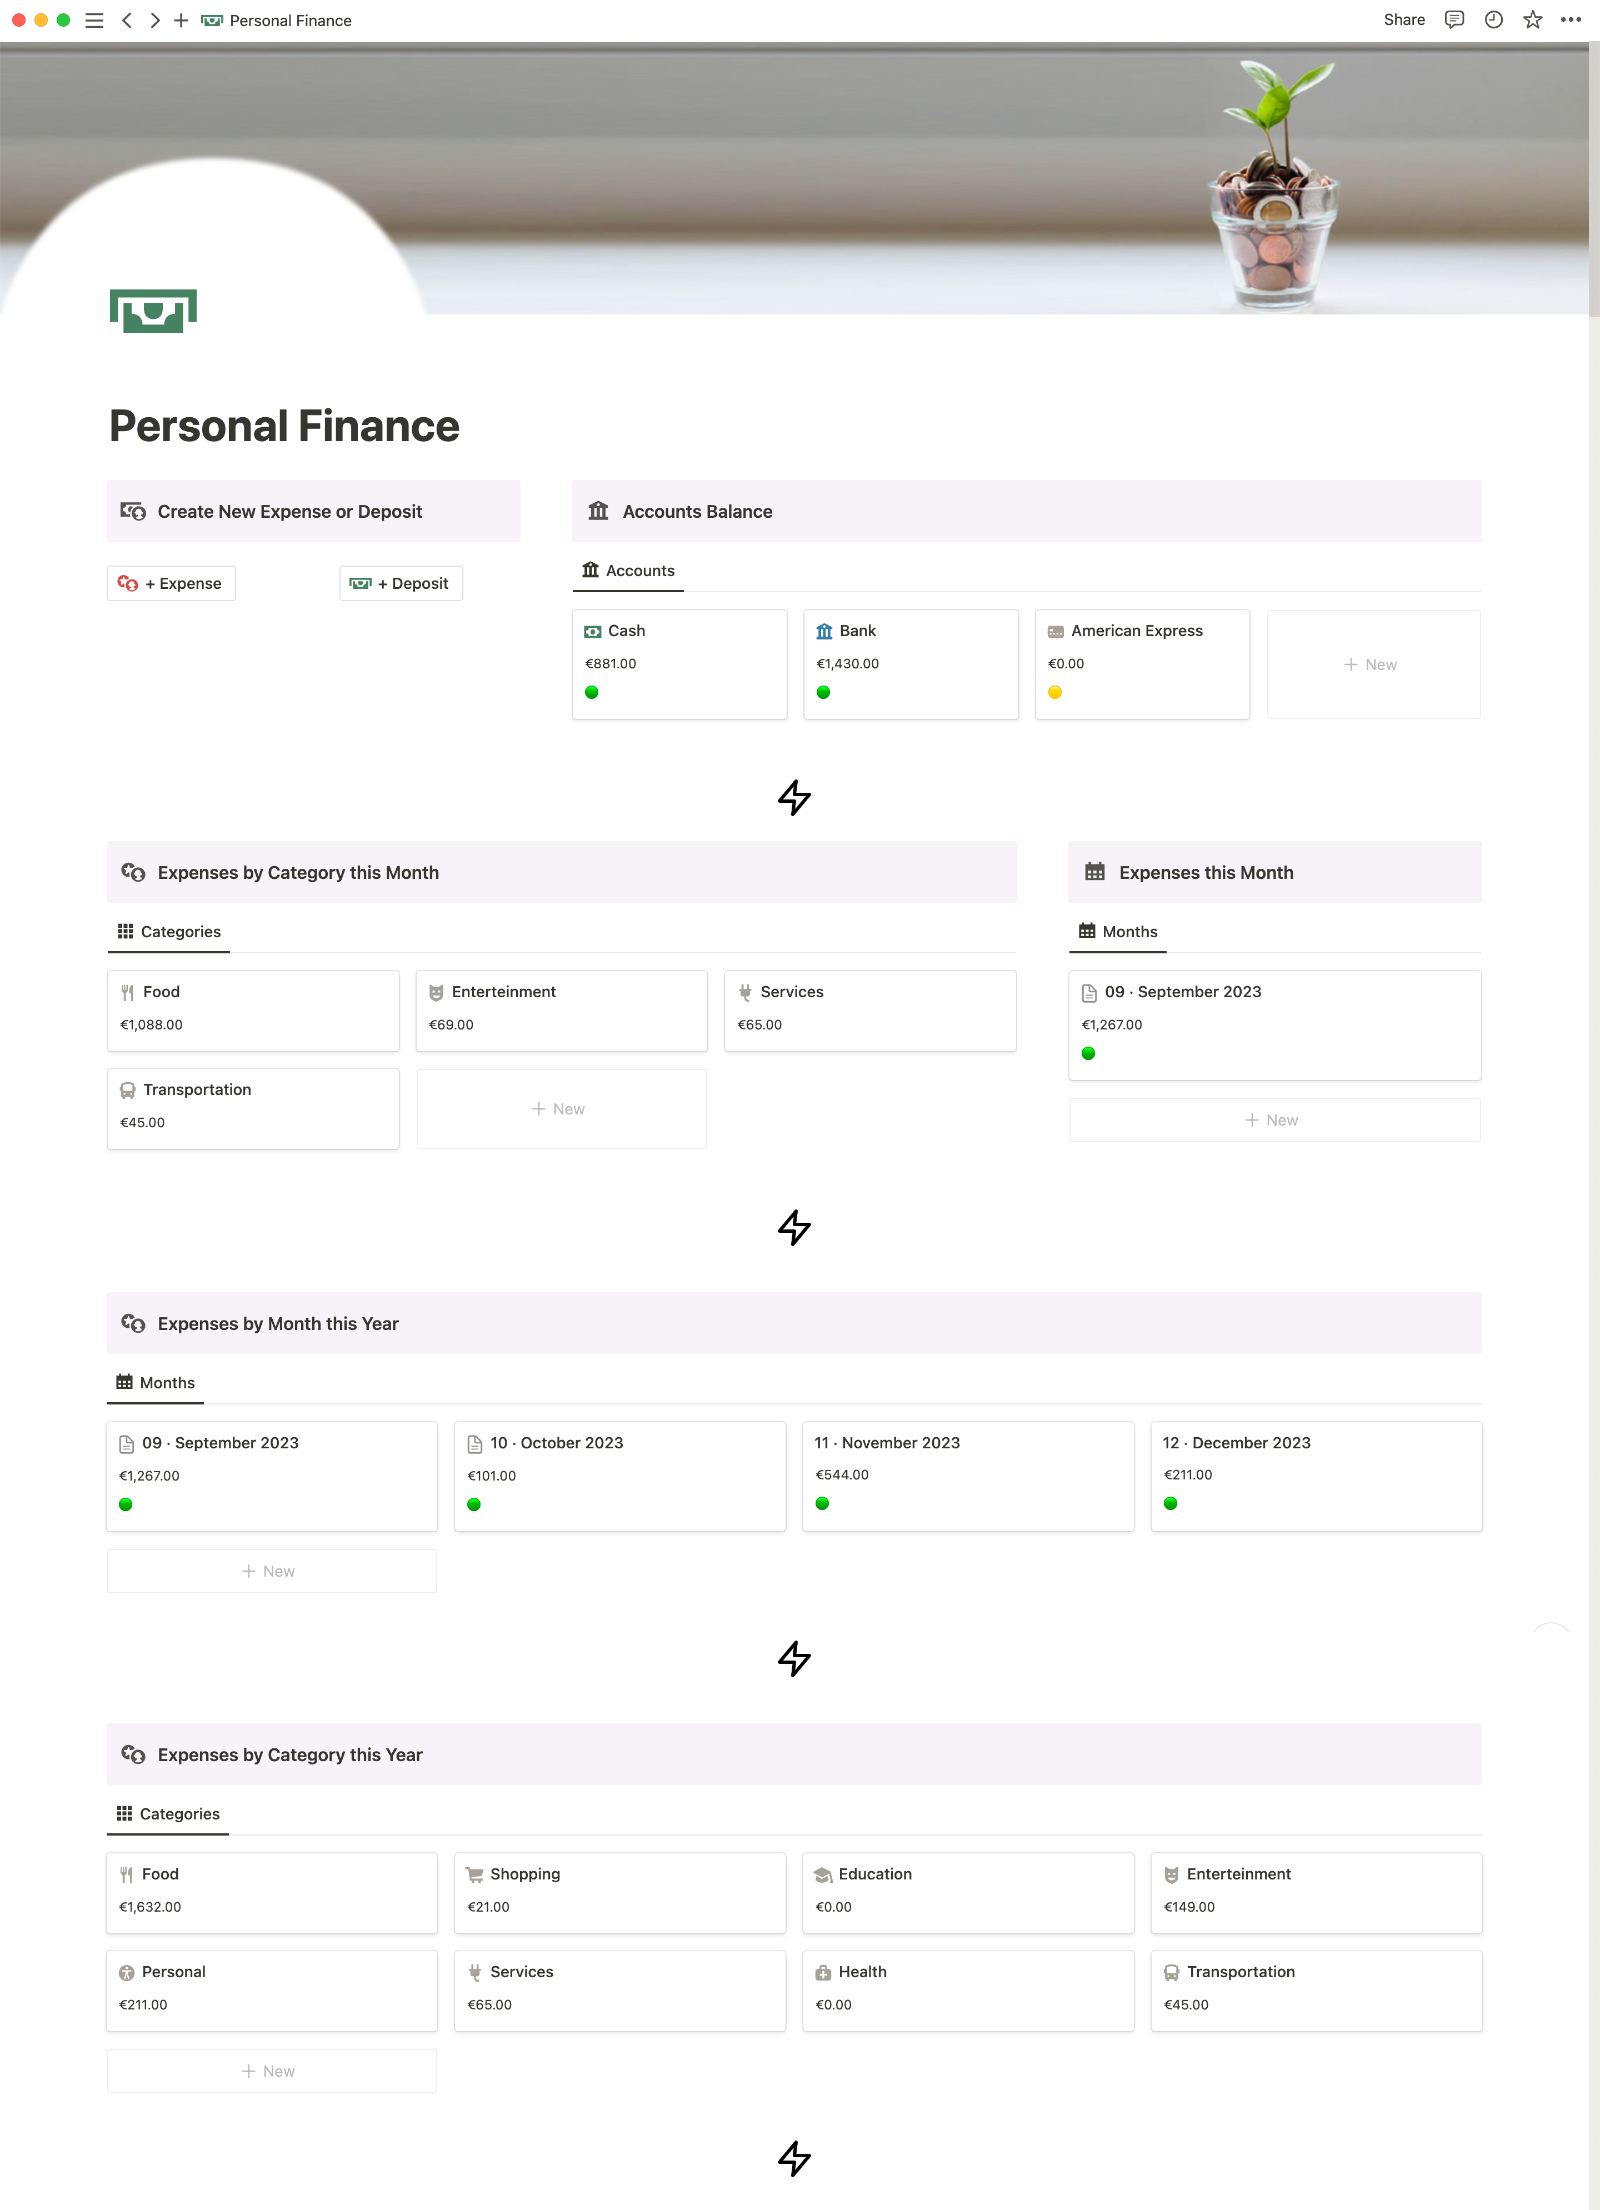 Dashboard for Personal Finance